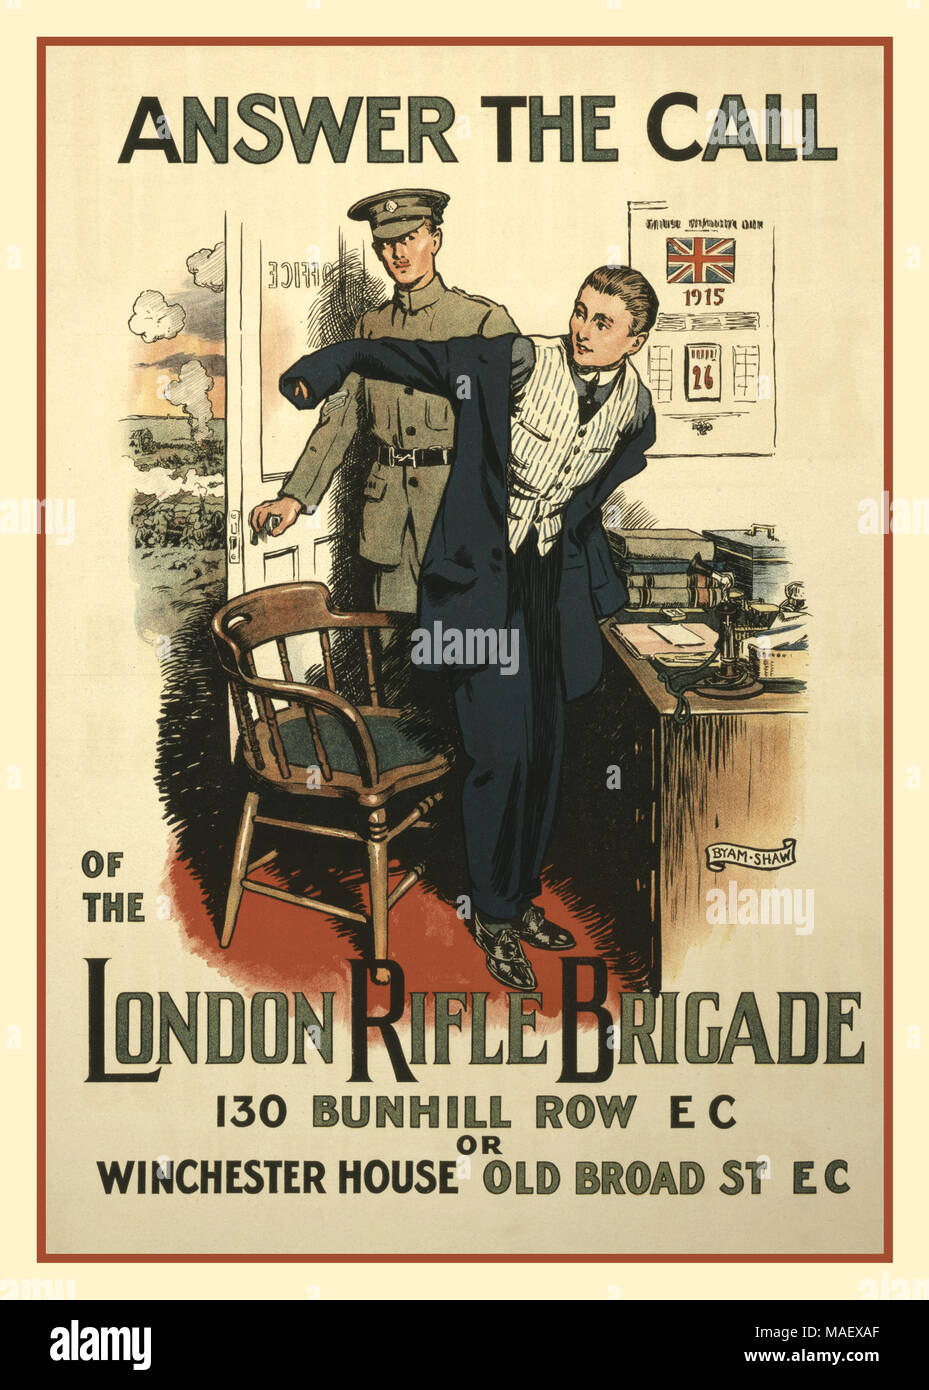 Vintage 1915 UK WW1 Lithograph Recruitment Poster 'Answer the call of the London Rifle Brigade' Poster showing civilian rising from his desk and putting on his coat, as a British Army man in uniform opens the office door to reveal a World War 1 battlefield    Notes: 130 Bunhill Row EC or Winchester House, Old Broad St. EC.; Byam Shaw.; Title from item. Date1915 Stock Photo